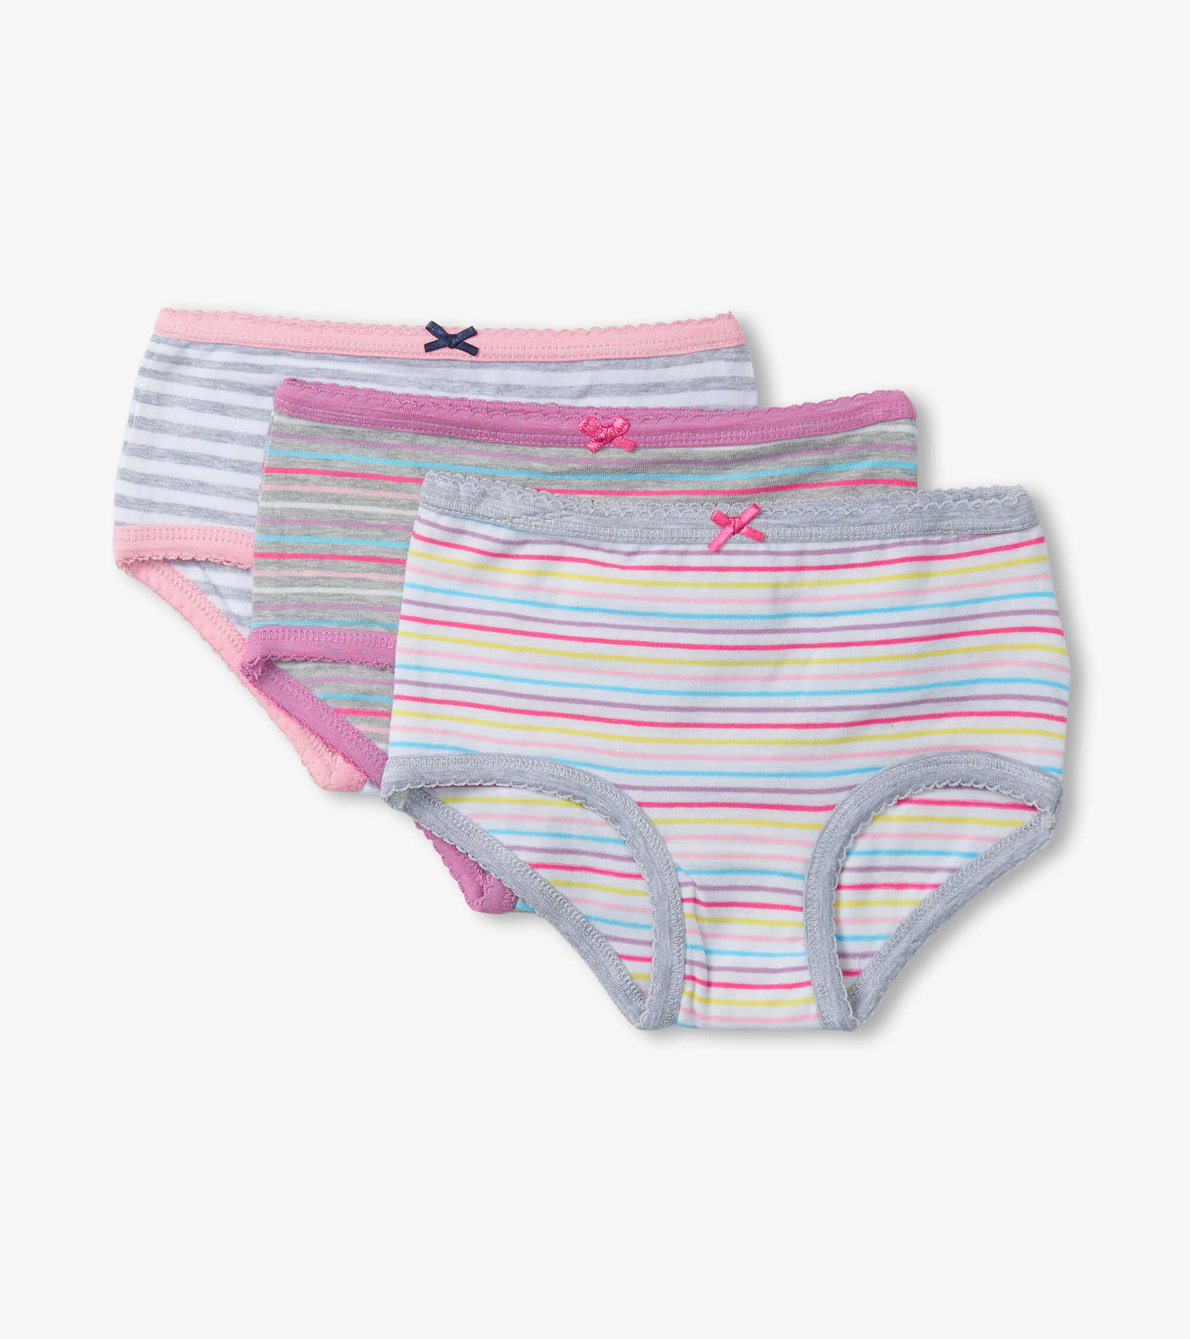 View larger image of Girls Vibrant Stripes 3 Pack Hipster Underwear